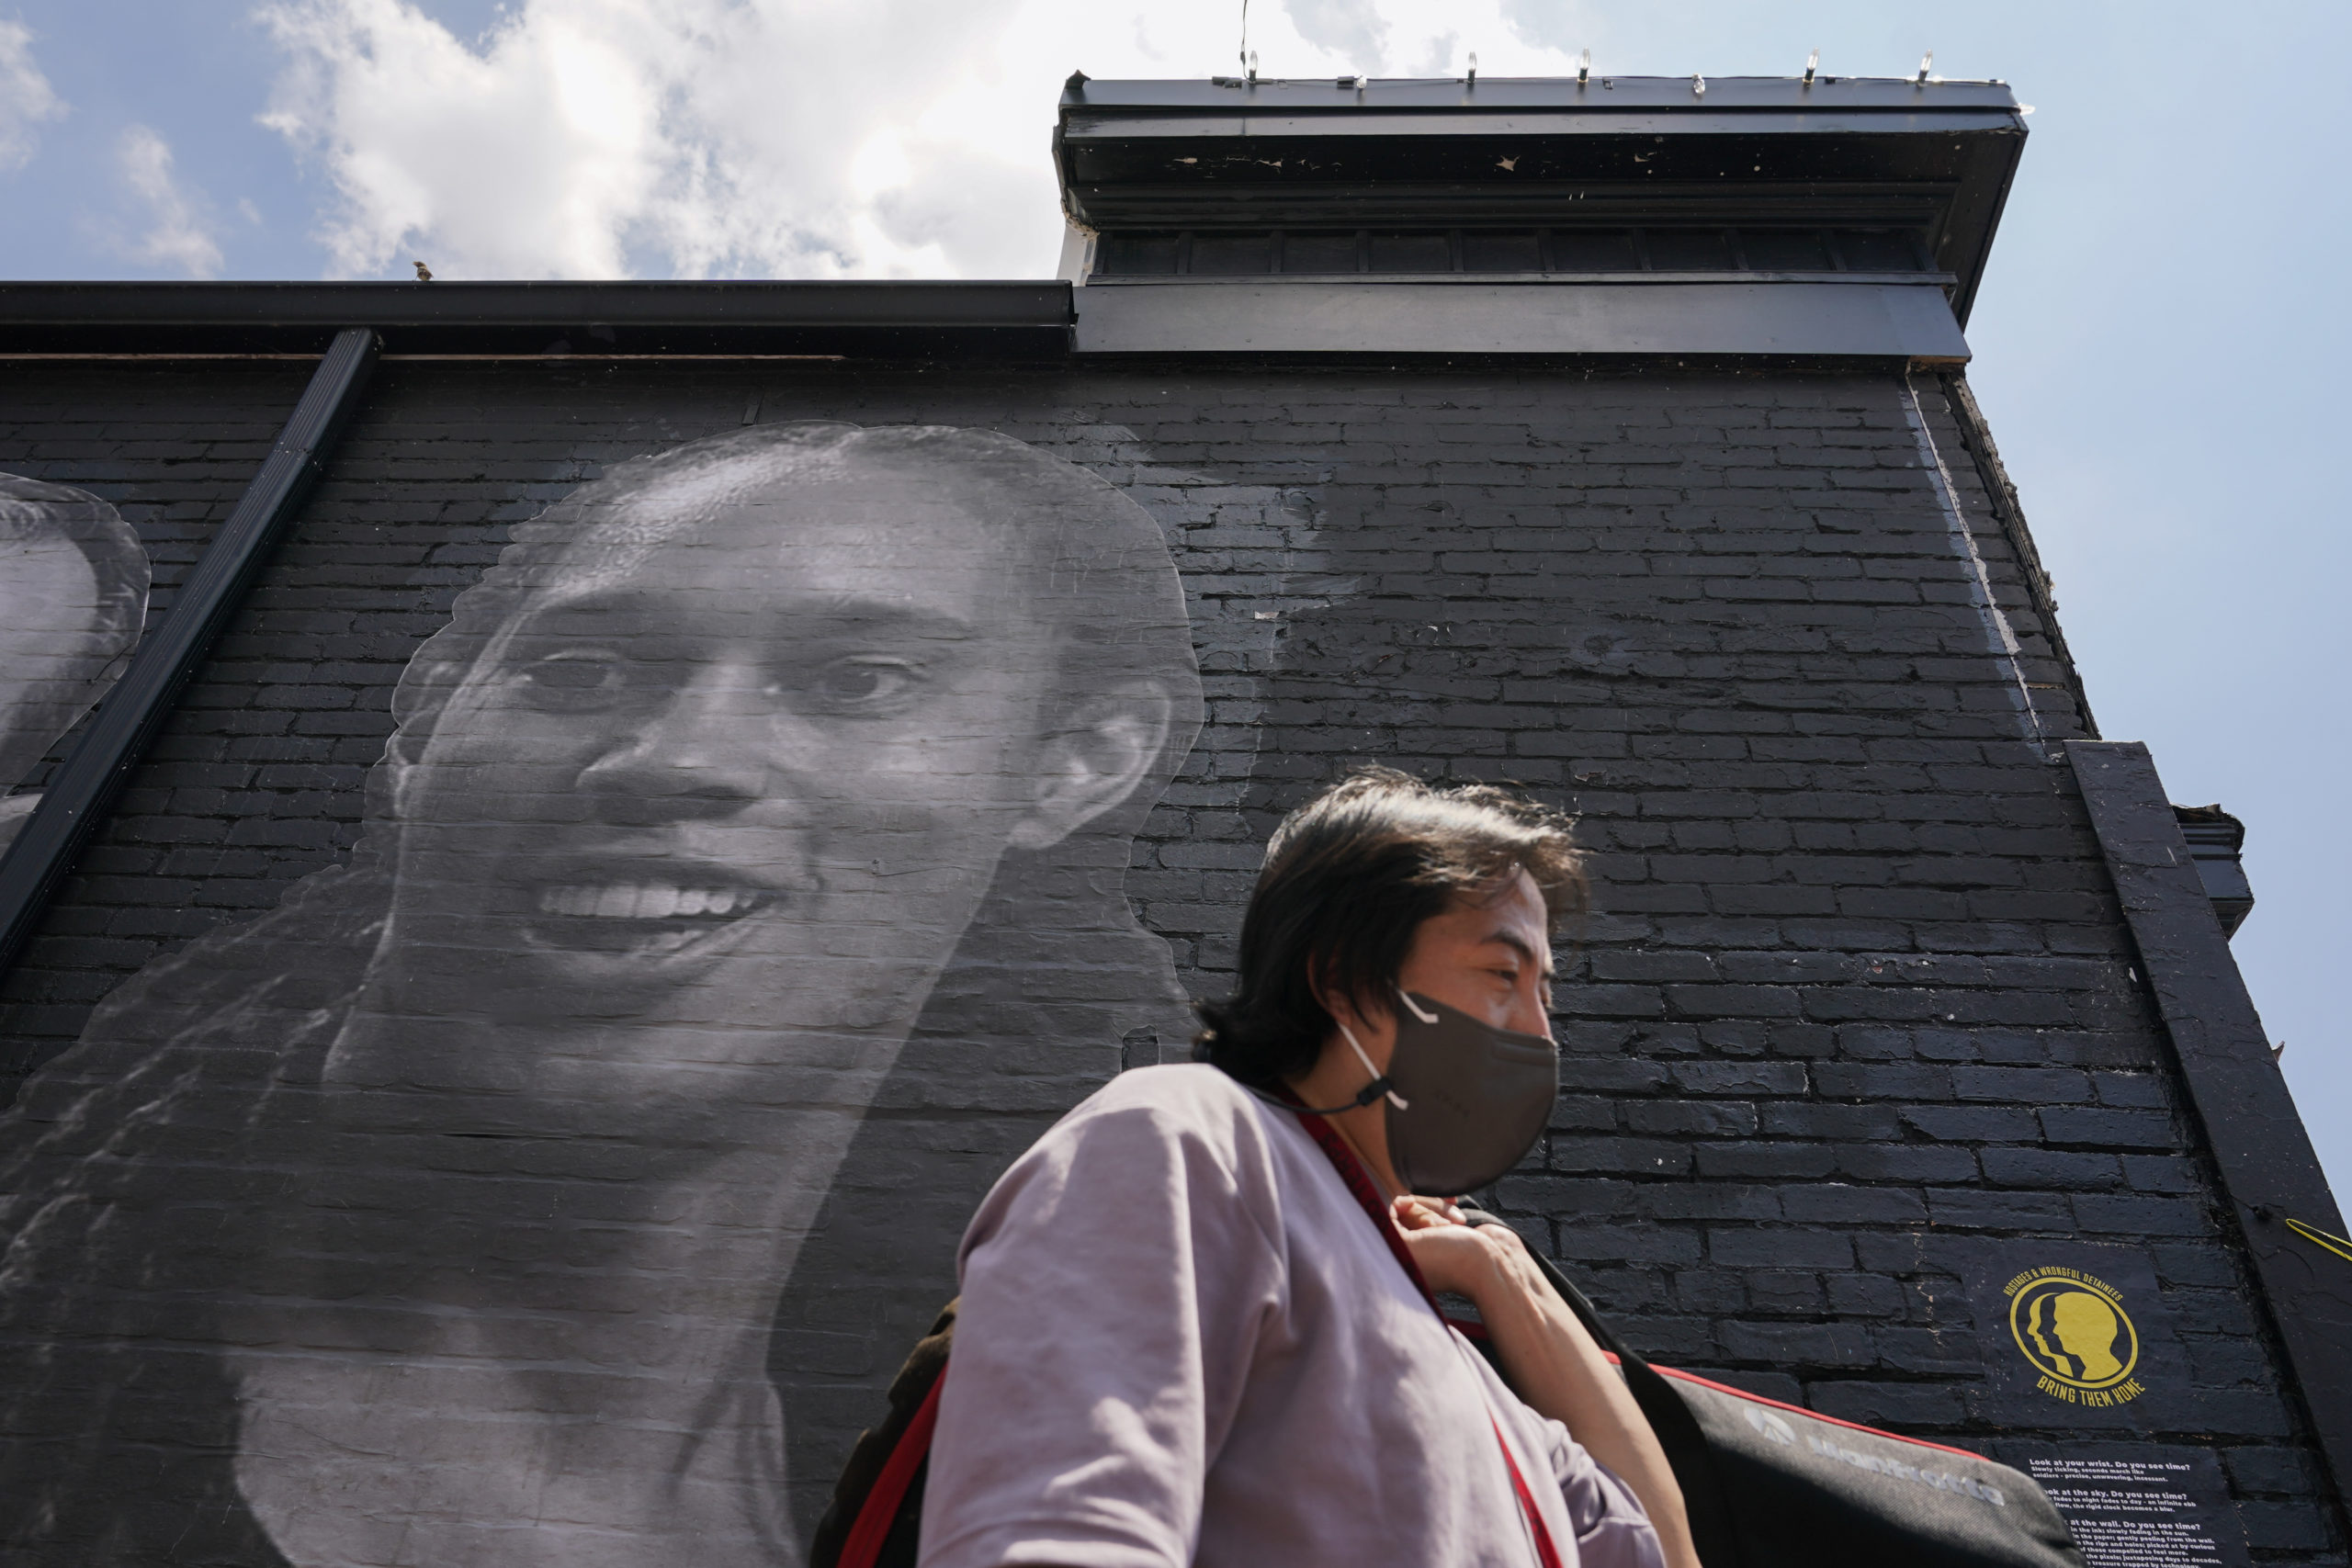 A visitor in the Georgetown neighborhood of Washington walks down an alley past a mural depicting WNBA star Brittney Griner and other American hostages and wrongful detainees who are being held abroad.